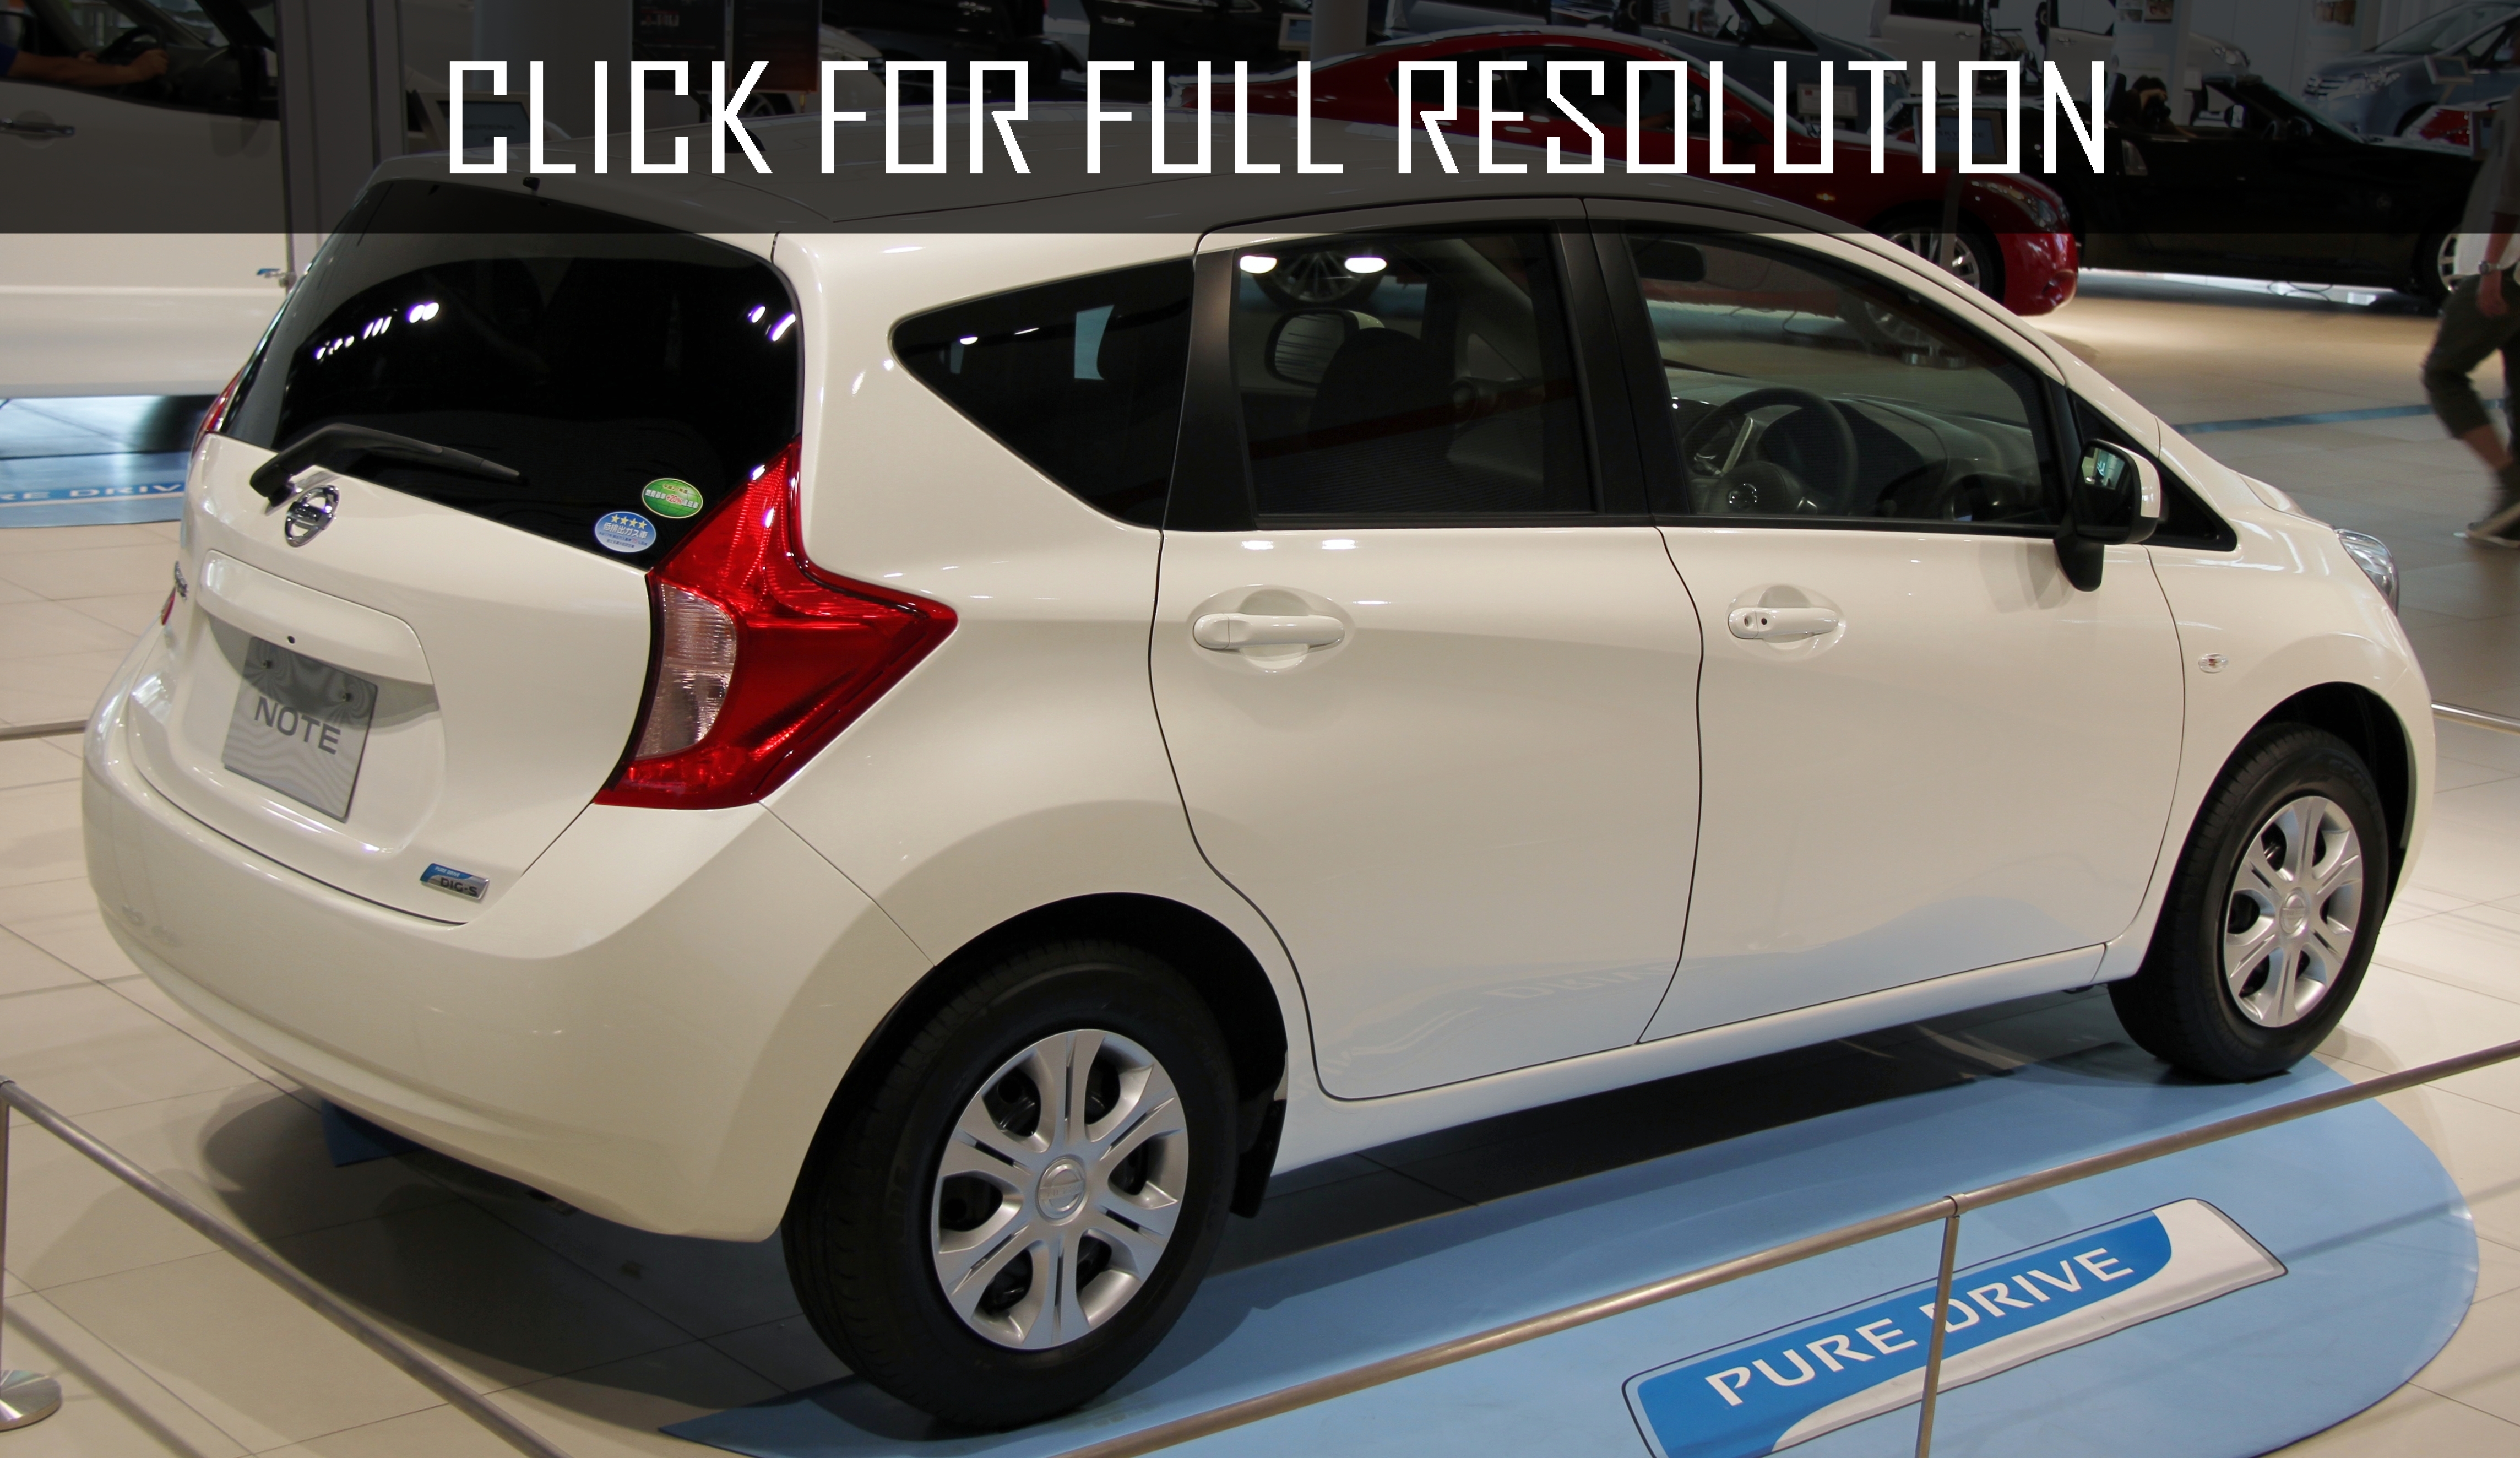 Nissan Note 4wd